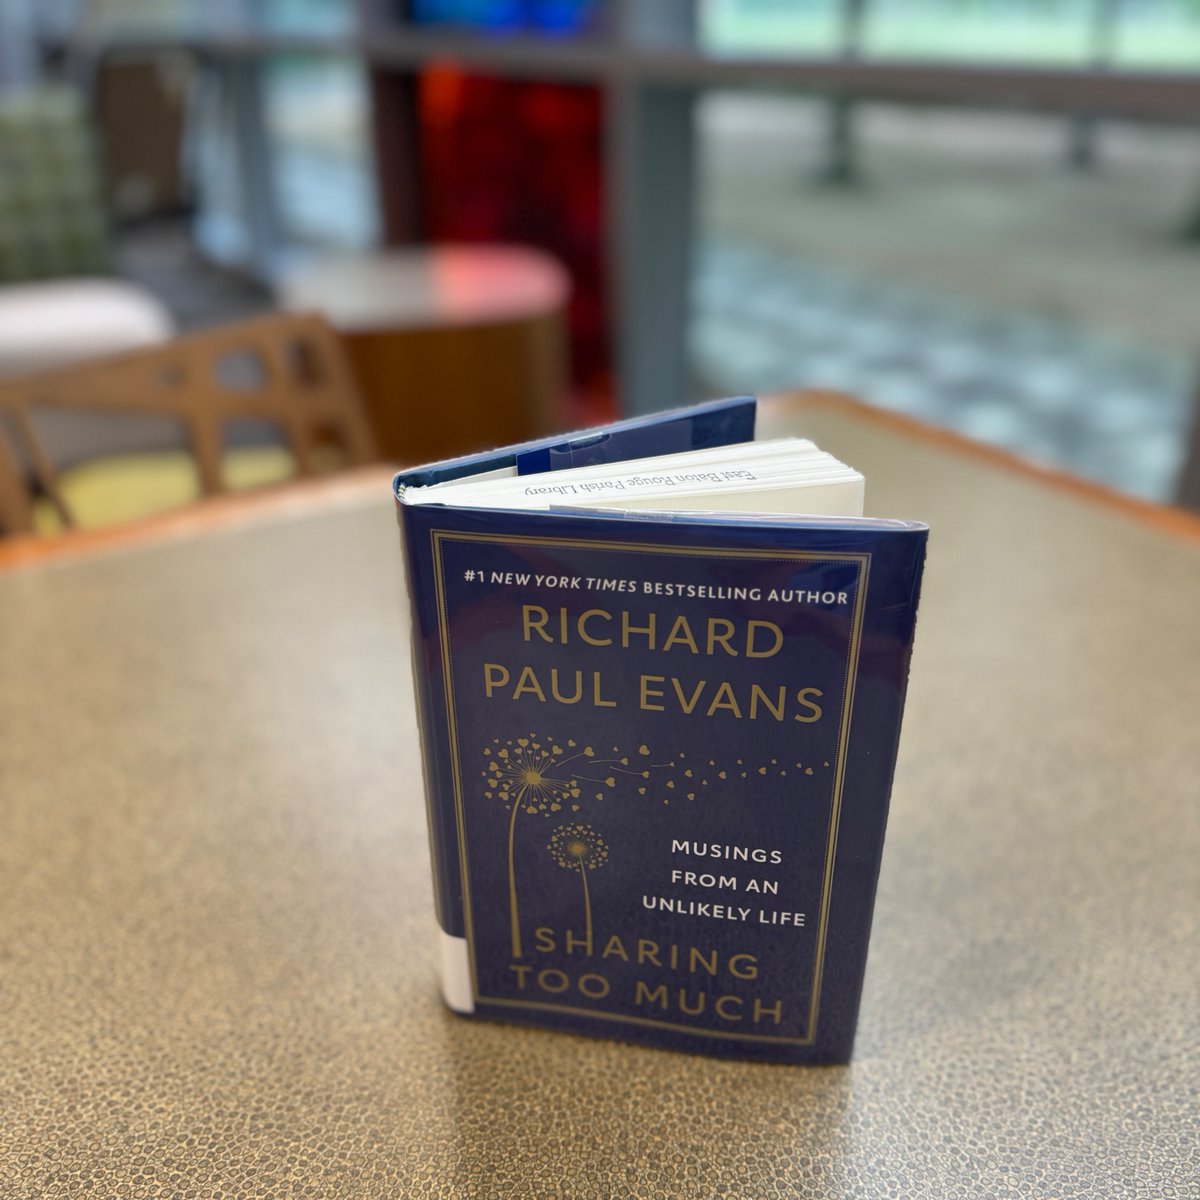 #SundaySelection Sharing Too Much: Inspirational Musings and Lessons from an Unlikely Life by Richard Paul Evans 'The #1 New York Times bestselling author delivers a charming and inspirational collection of personal essays.' #ebrpl #staffpick #sharingtoomuch #richardpaulevans